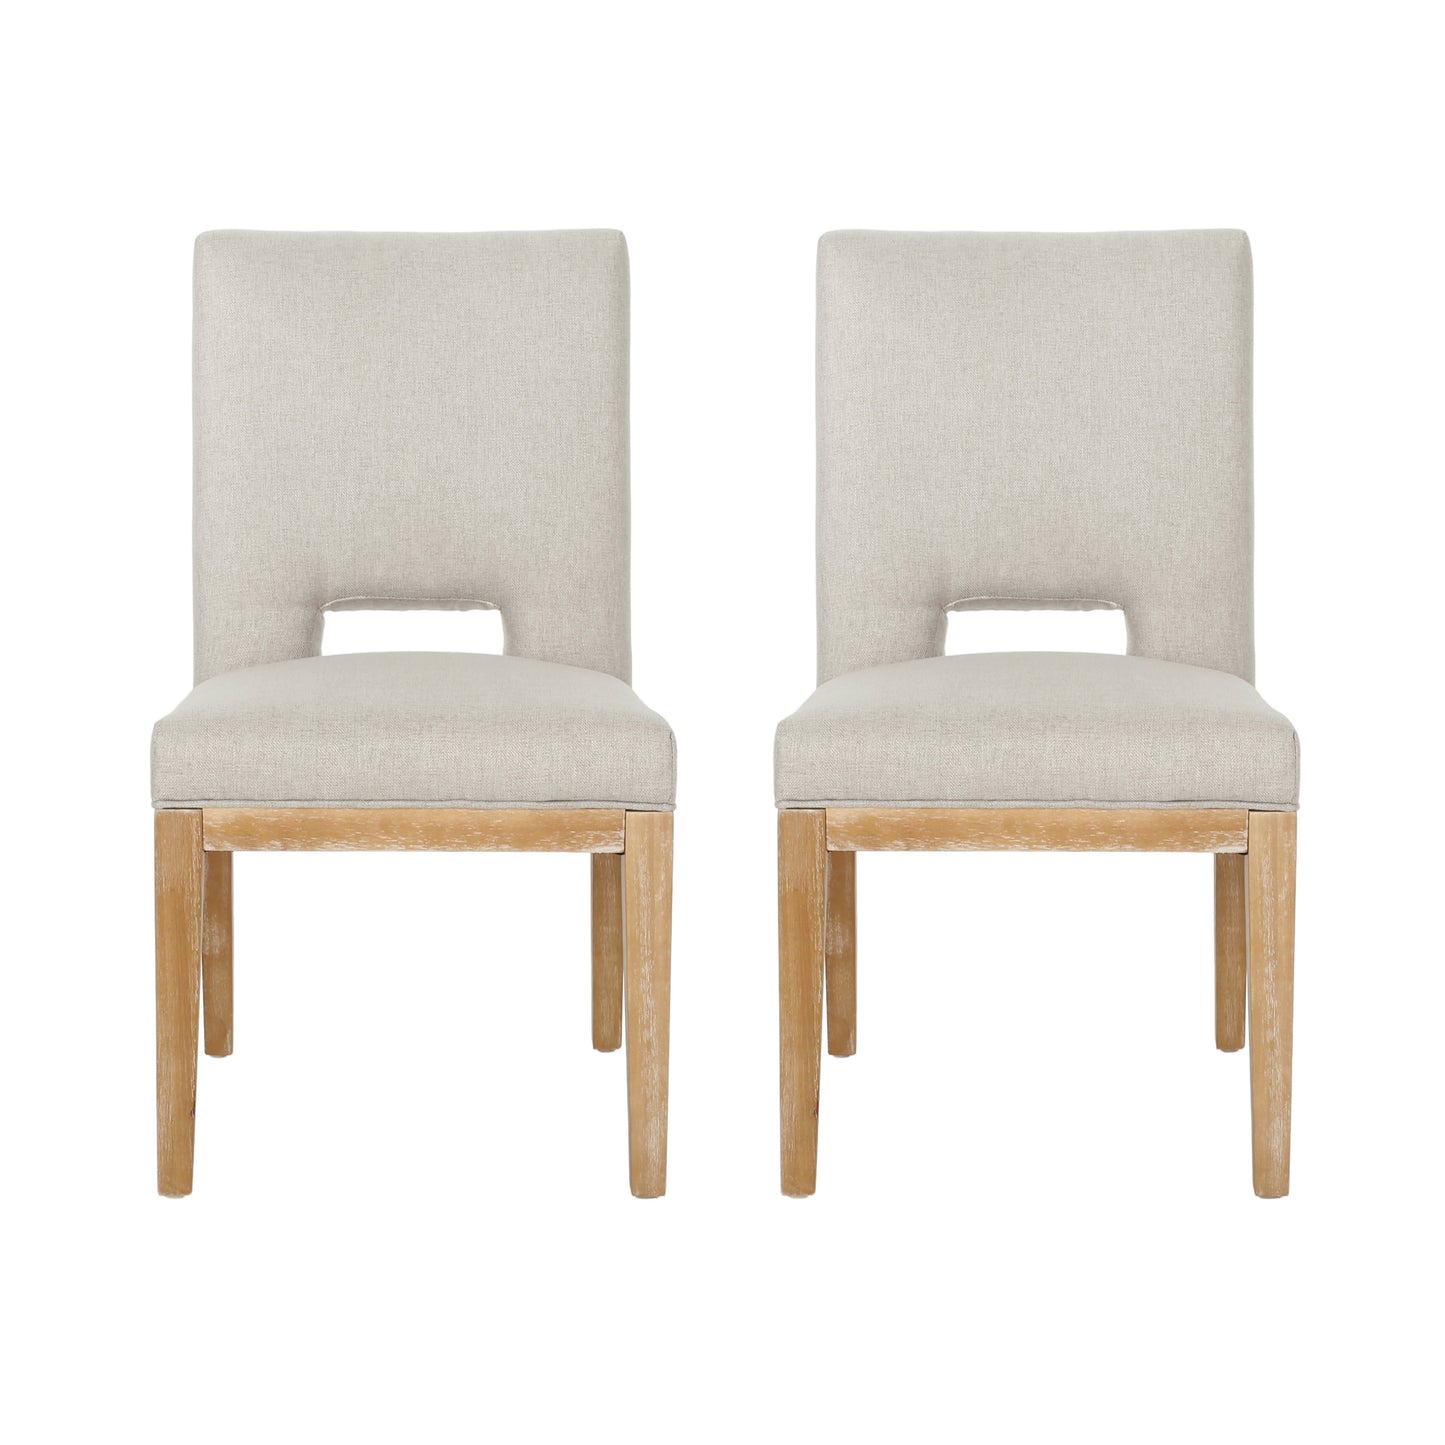 Parkey Upholstered Dining Chairs, Set of 2